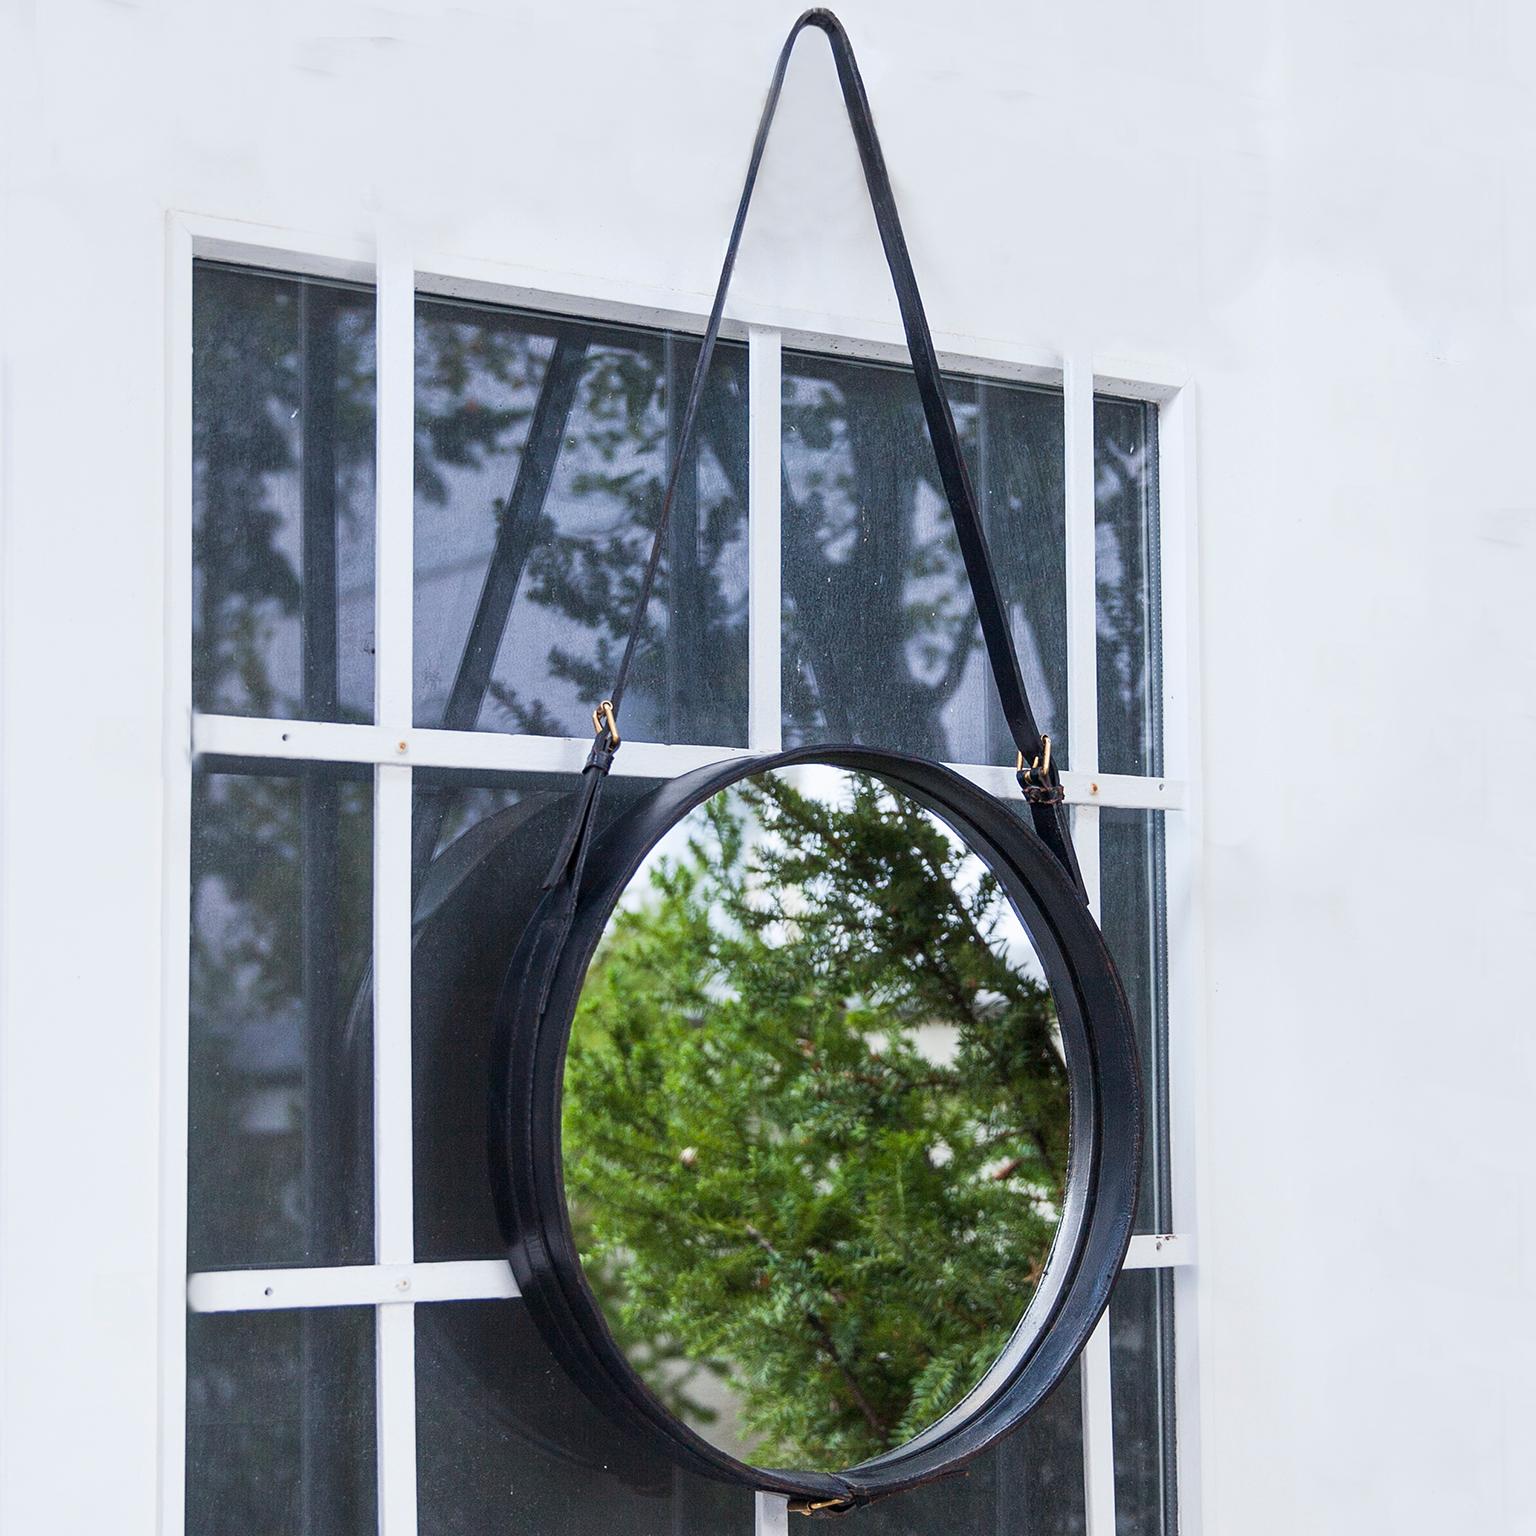 Elegant round wall mirror designed by French designer Jacques Adnet in 1950, Jacques Adnet developed a collection of furniture and accessories for Hermès, this mirror was part of this collection. Black handstitched leather frame with straps and